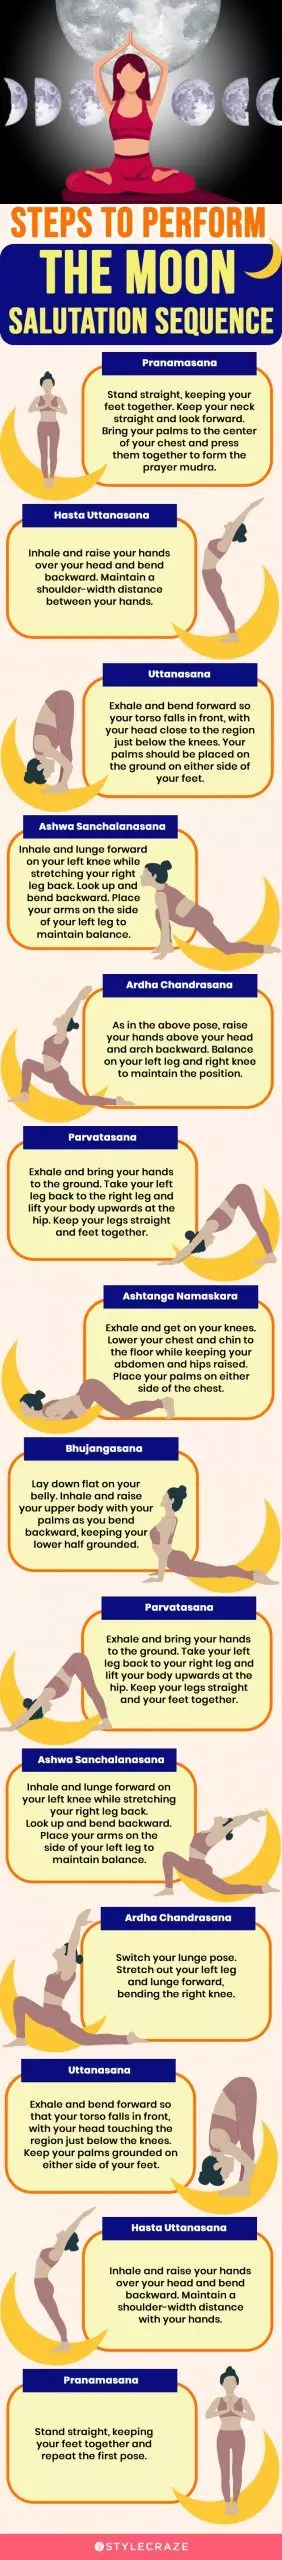 steps to perform the moon salutation sequence (infographic)